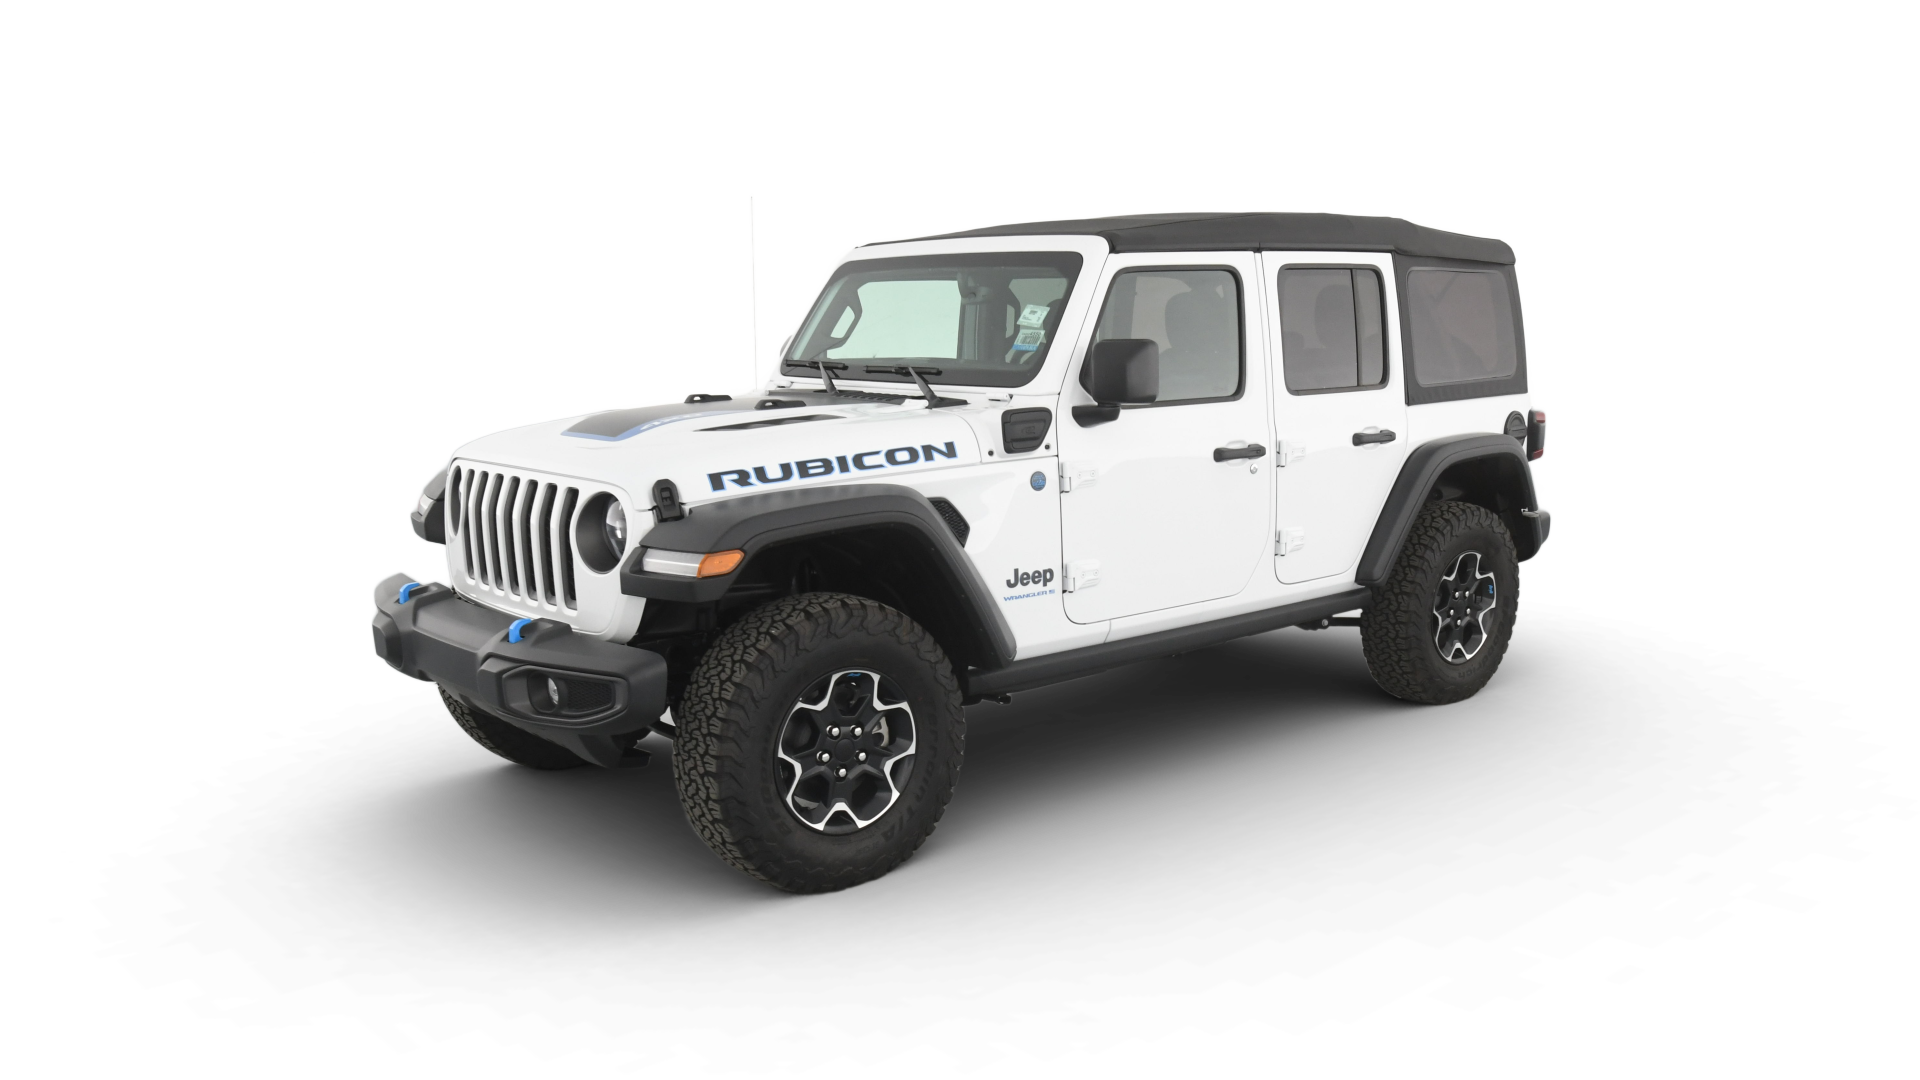 Used Blue Jeep Cherokee For Sale Online | Carvana